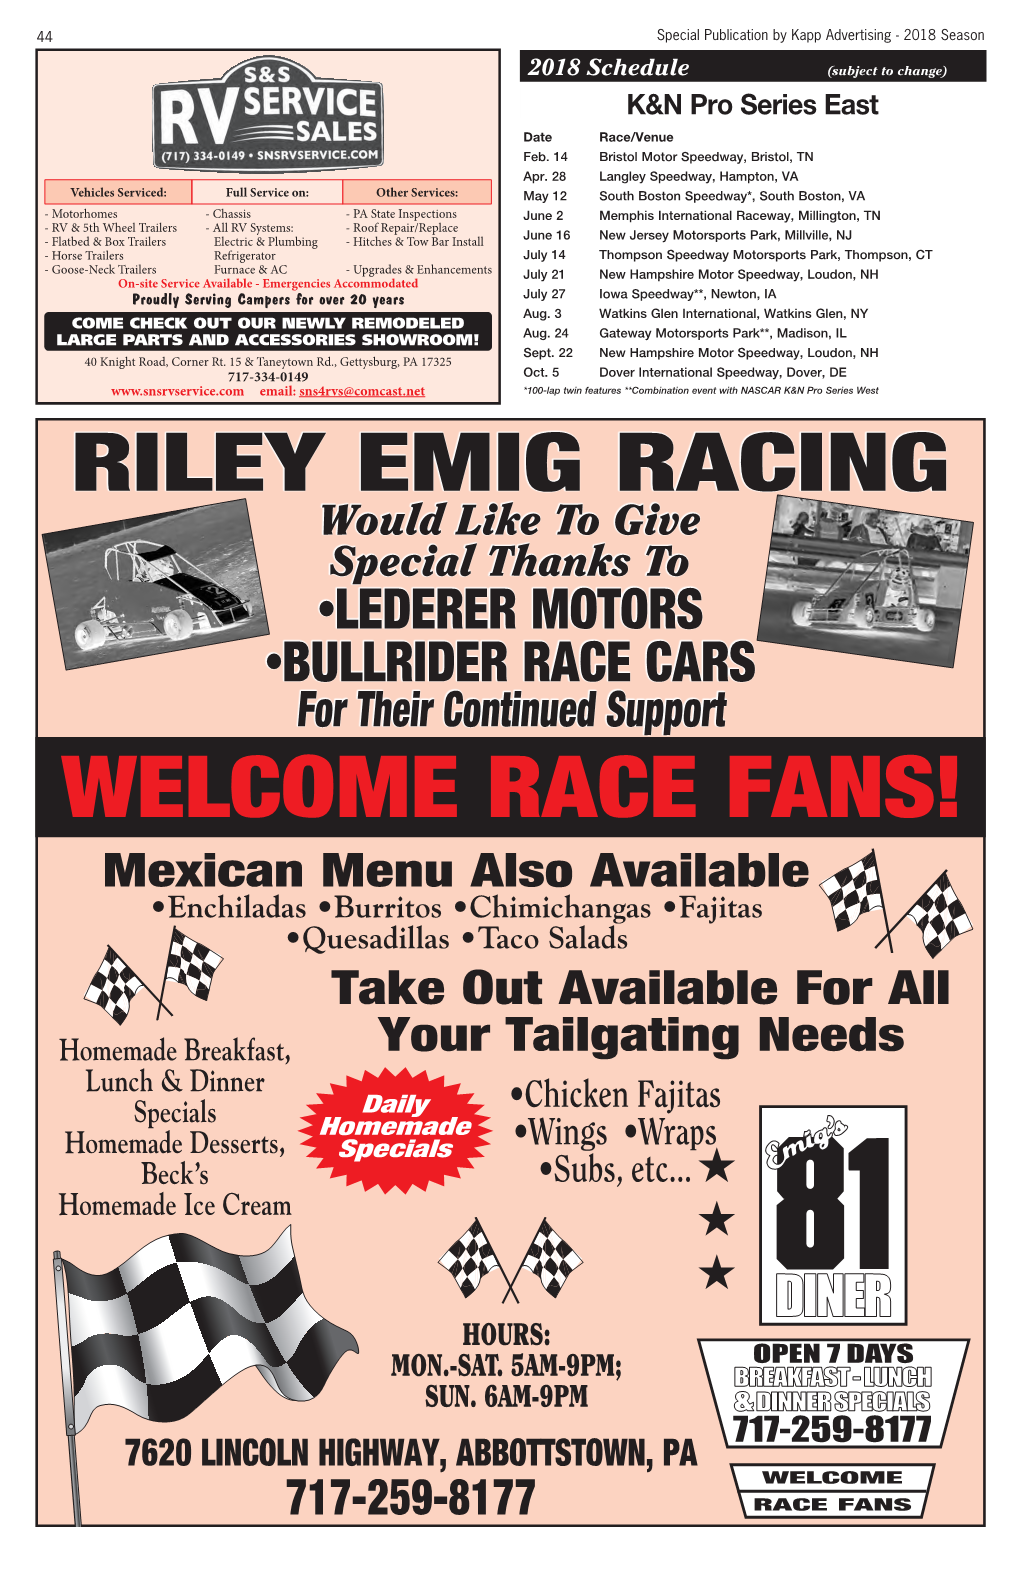 Welcome Race Fans!